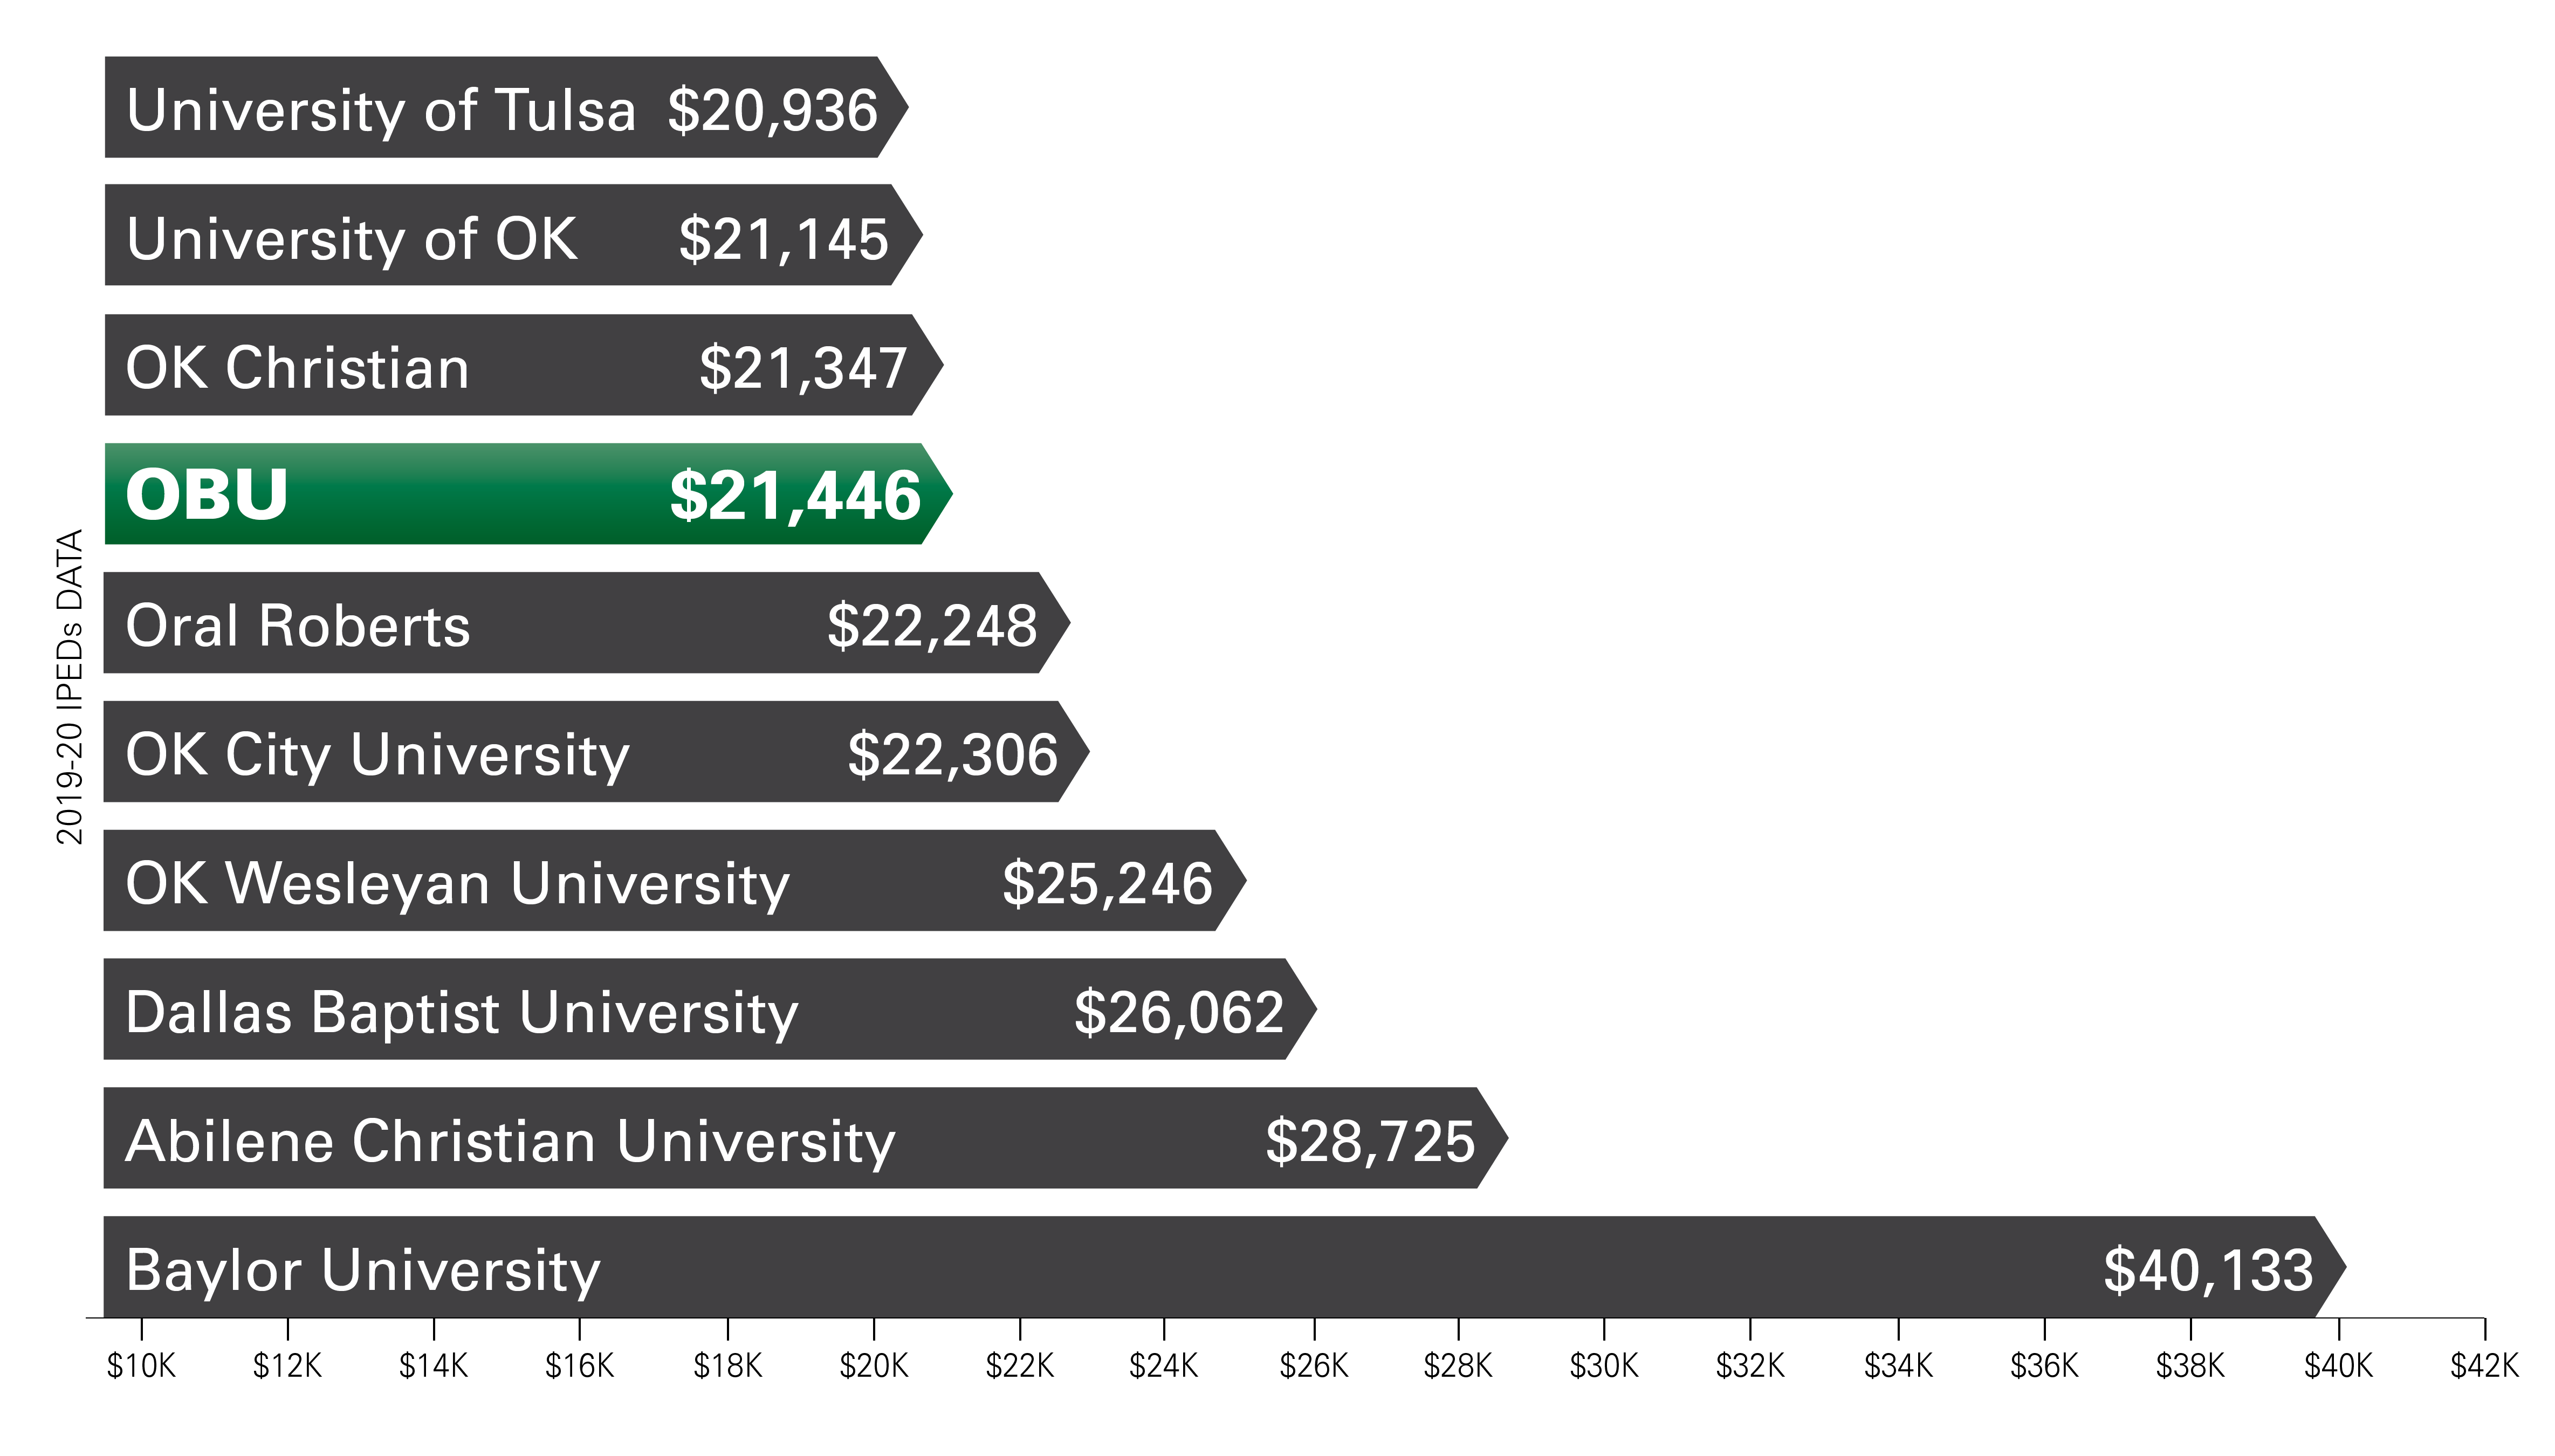 Of the seven Oklahoma colleges listed here, OBU has the lowest Net Price at $18,173.